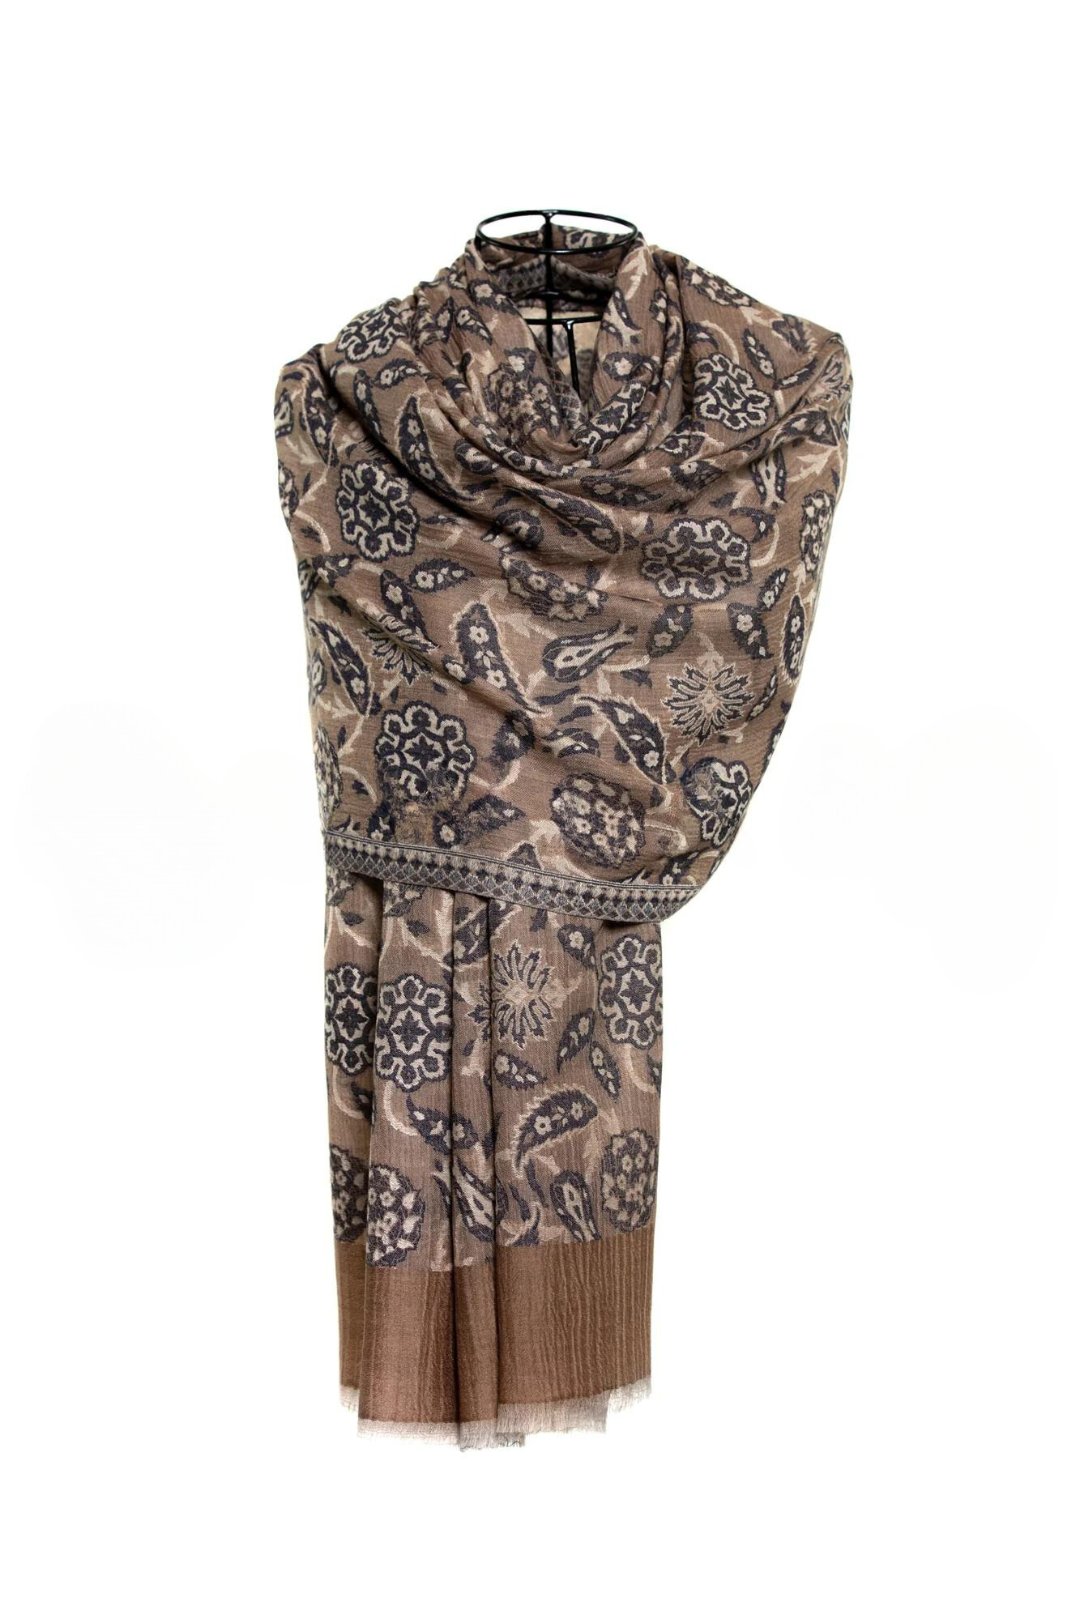 Abstract Floral Paisley Cashmere Pashmina Shawl - Espresso